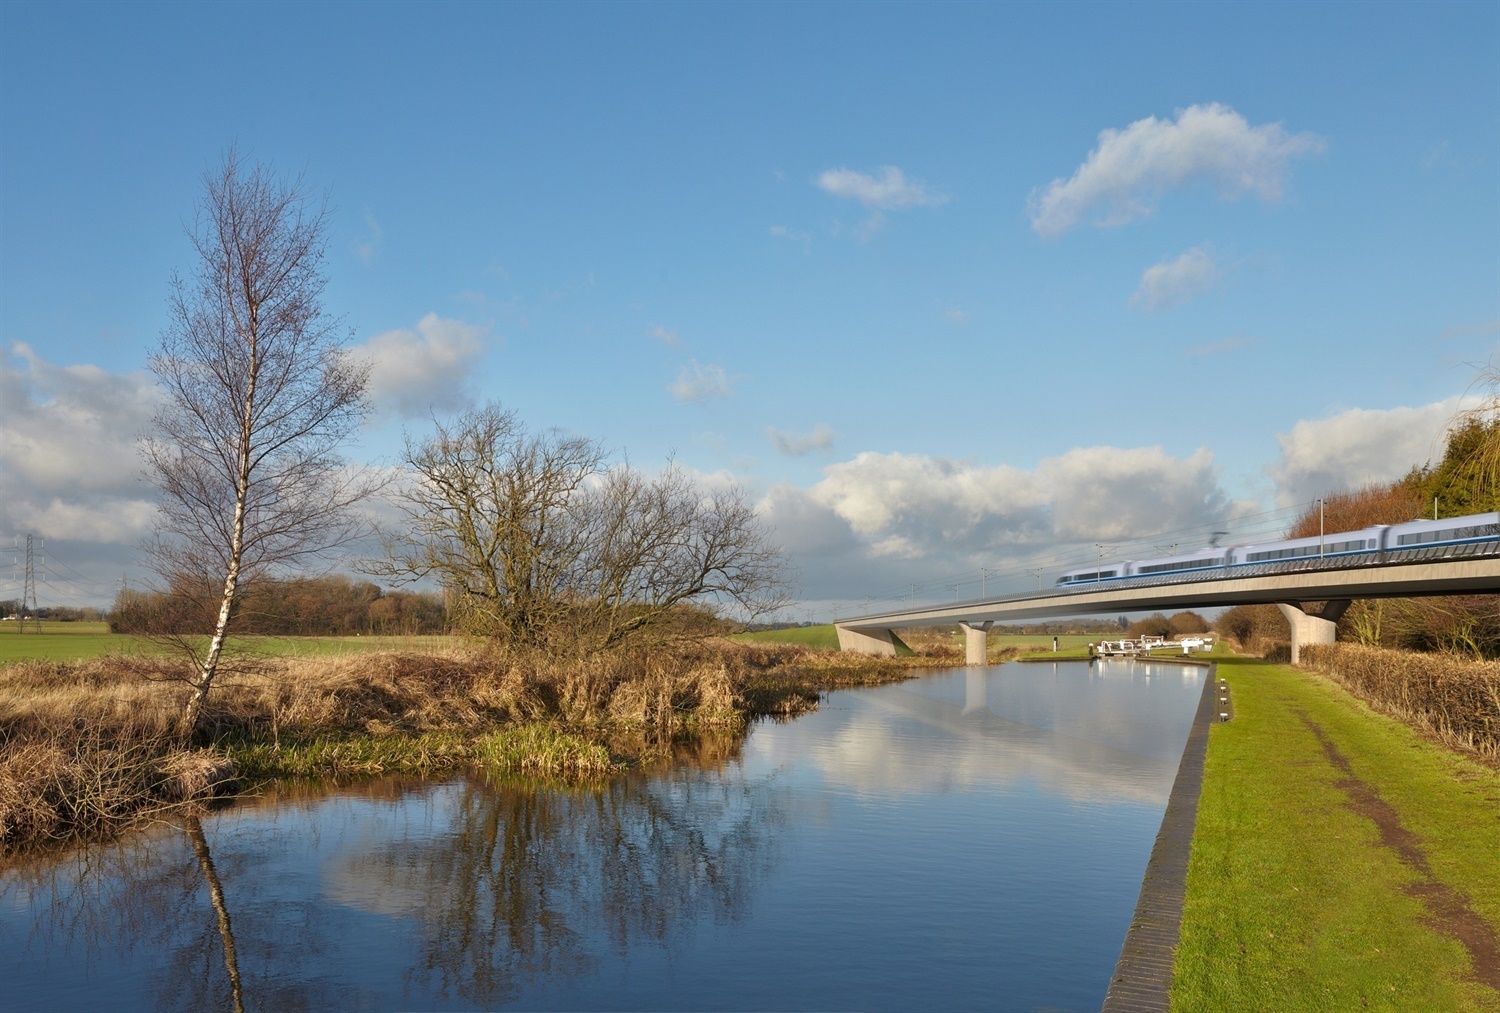 Franchise combines WCML services with HS2 in ‘seamless integration’